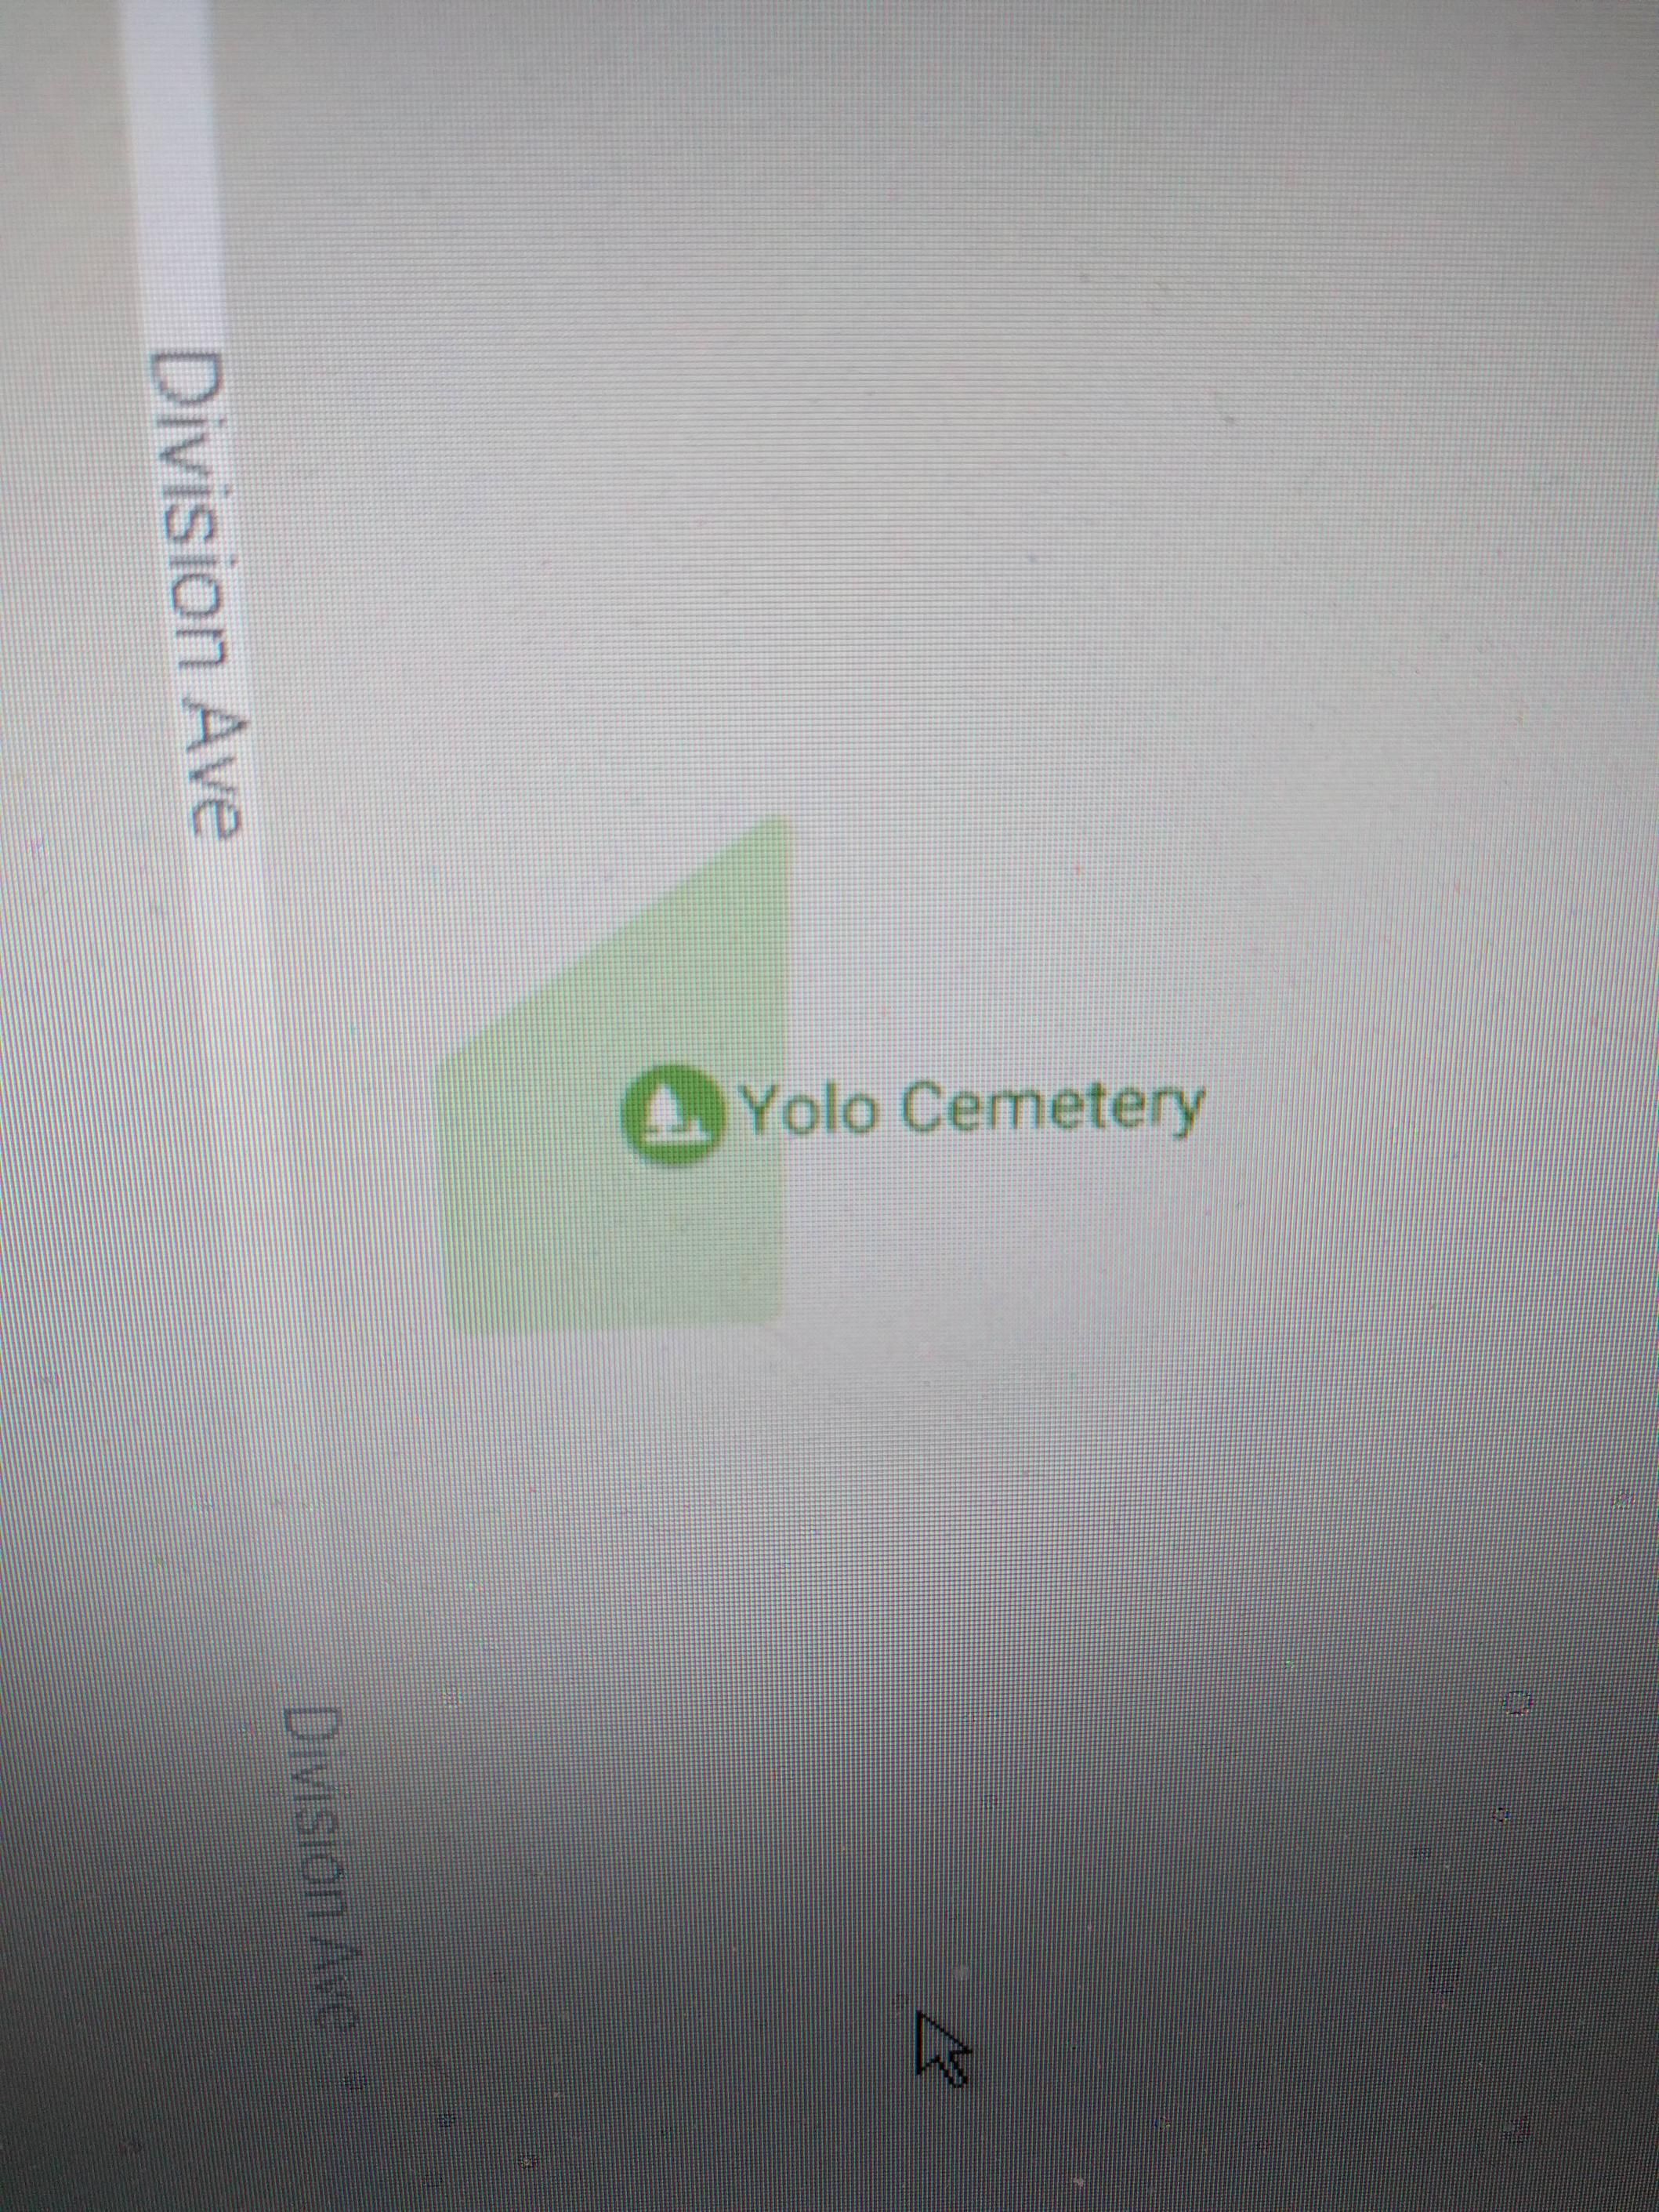 The YOLO Cemetery as seen on a map.